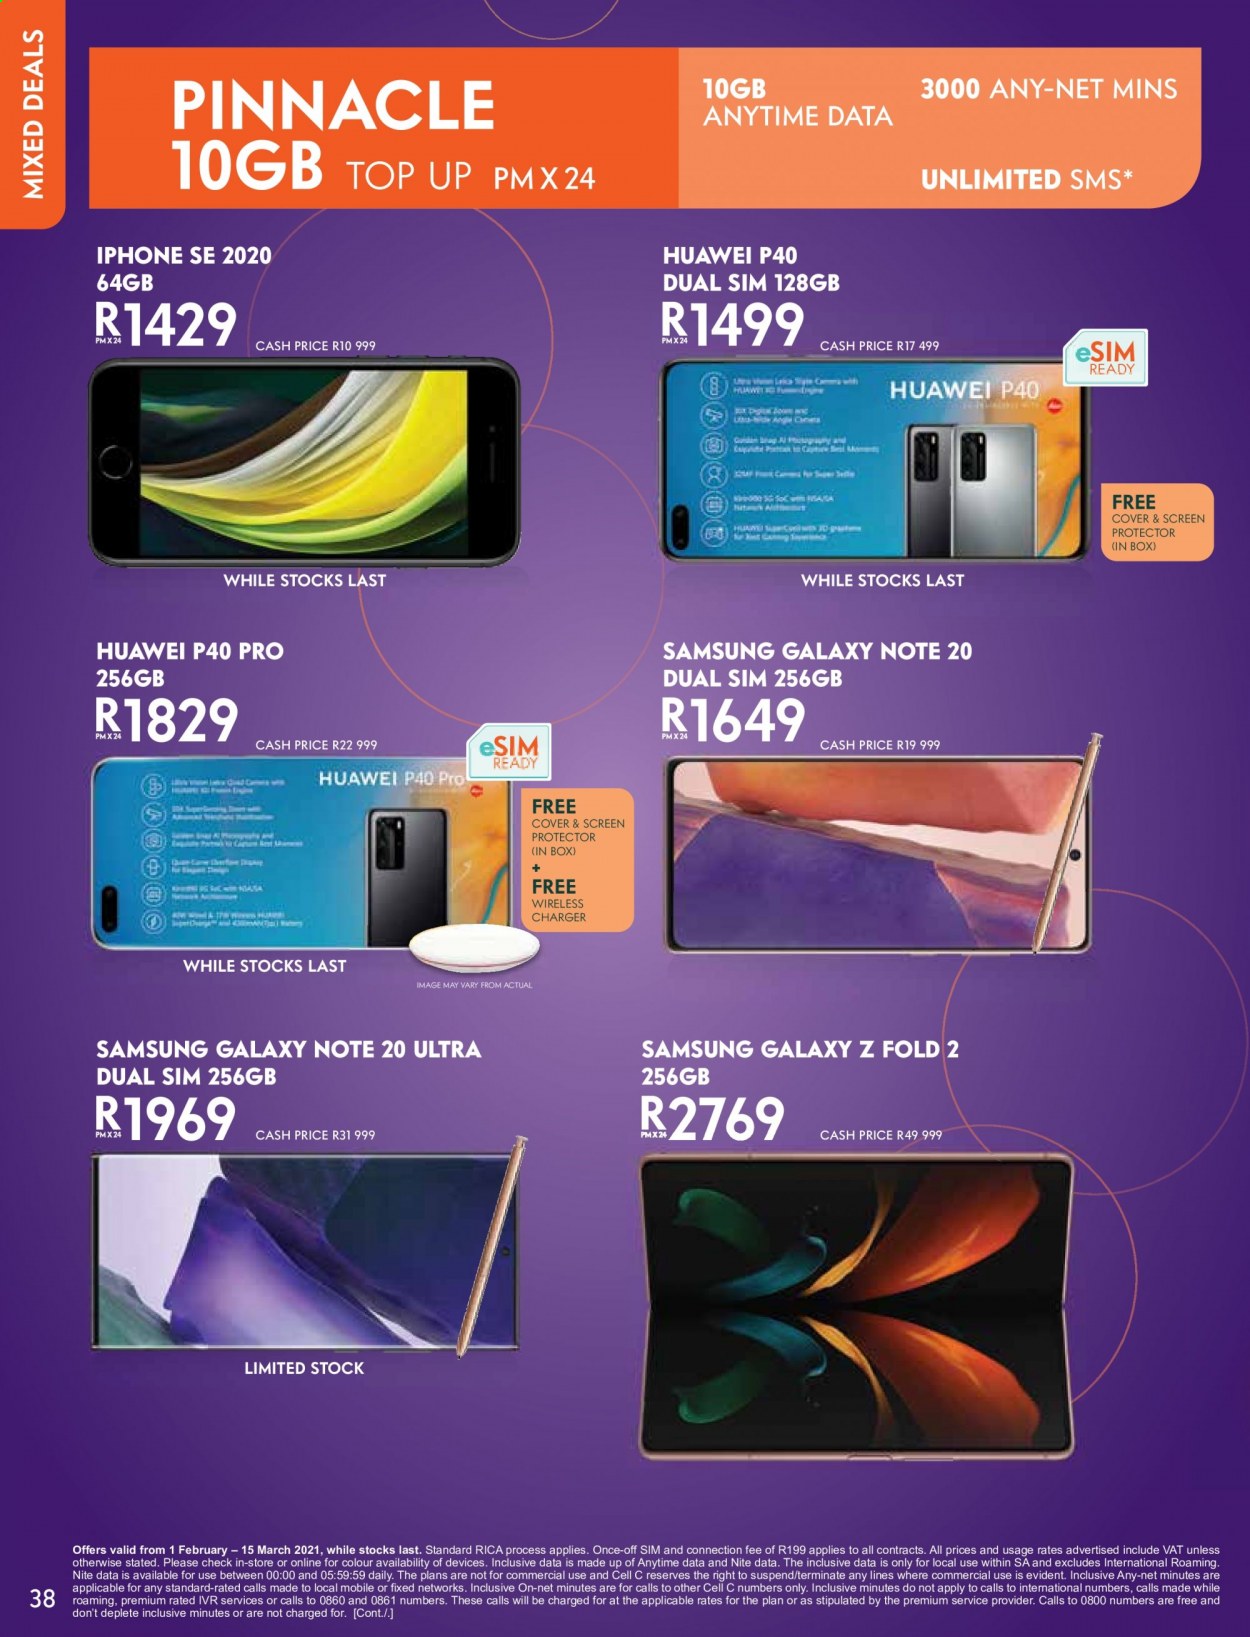 Cell C specials - 02.01.2021 - 03.15.2021. 